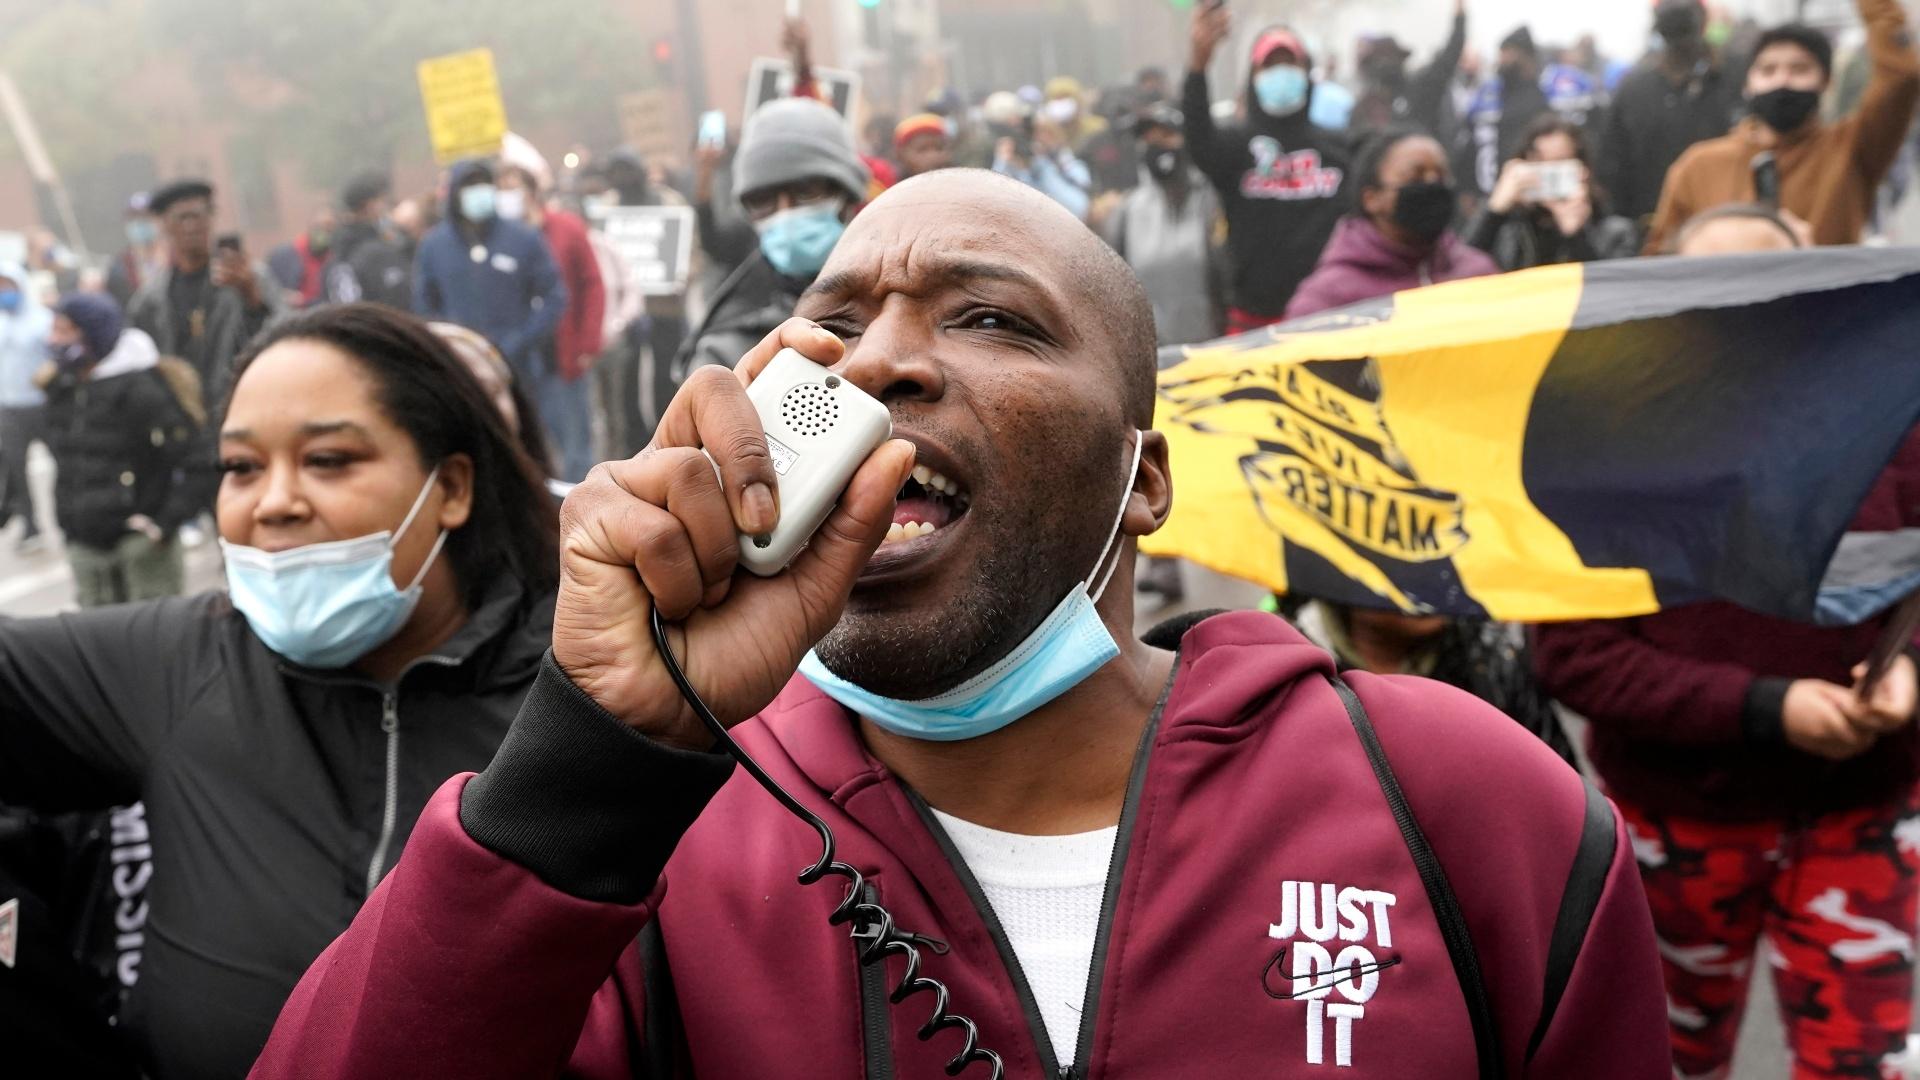 Rayon Edwards speaks on a megaphone as he marches with protesters during a protest rally for Marcellis Stinnette who was killed by Waukegan Police Tuesday in Waukegan, Ill., Thursday, Oct. 22, 2020. (AP Photo / Nam Y. Huh)